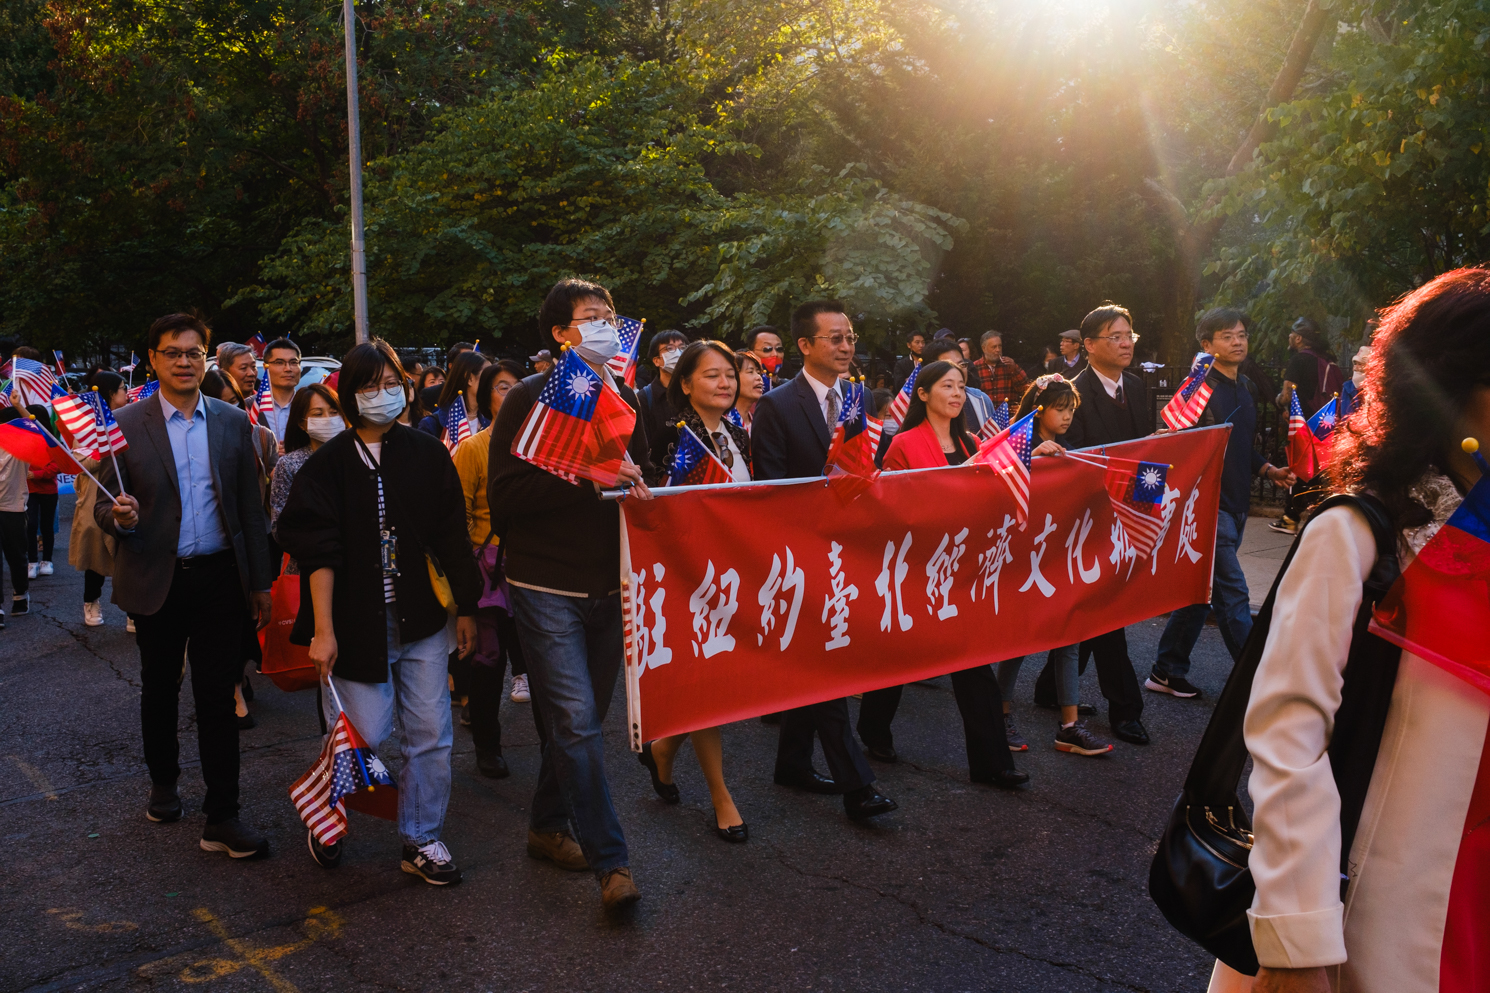 Attendees holding Taiwanese flags and a red banner that translates to “The Taipei Economic and Cultural Office in New York” march down Mulberry Street.